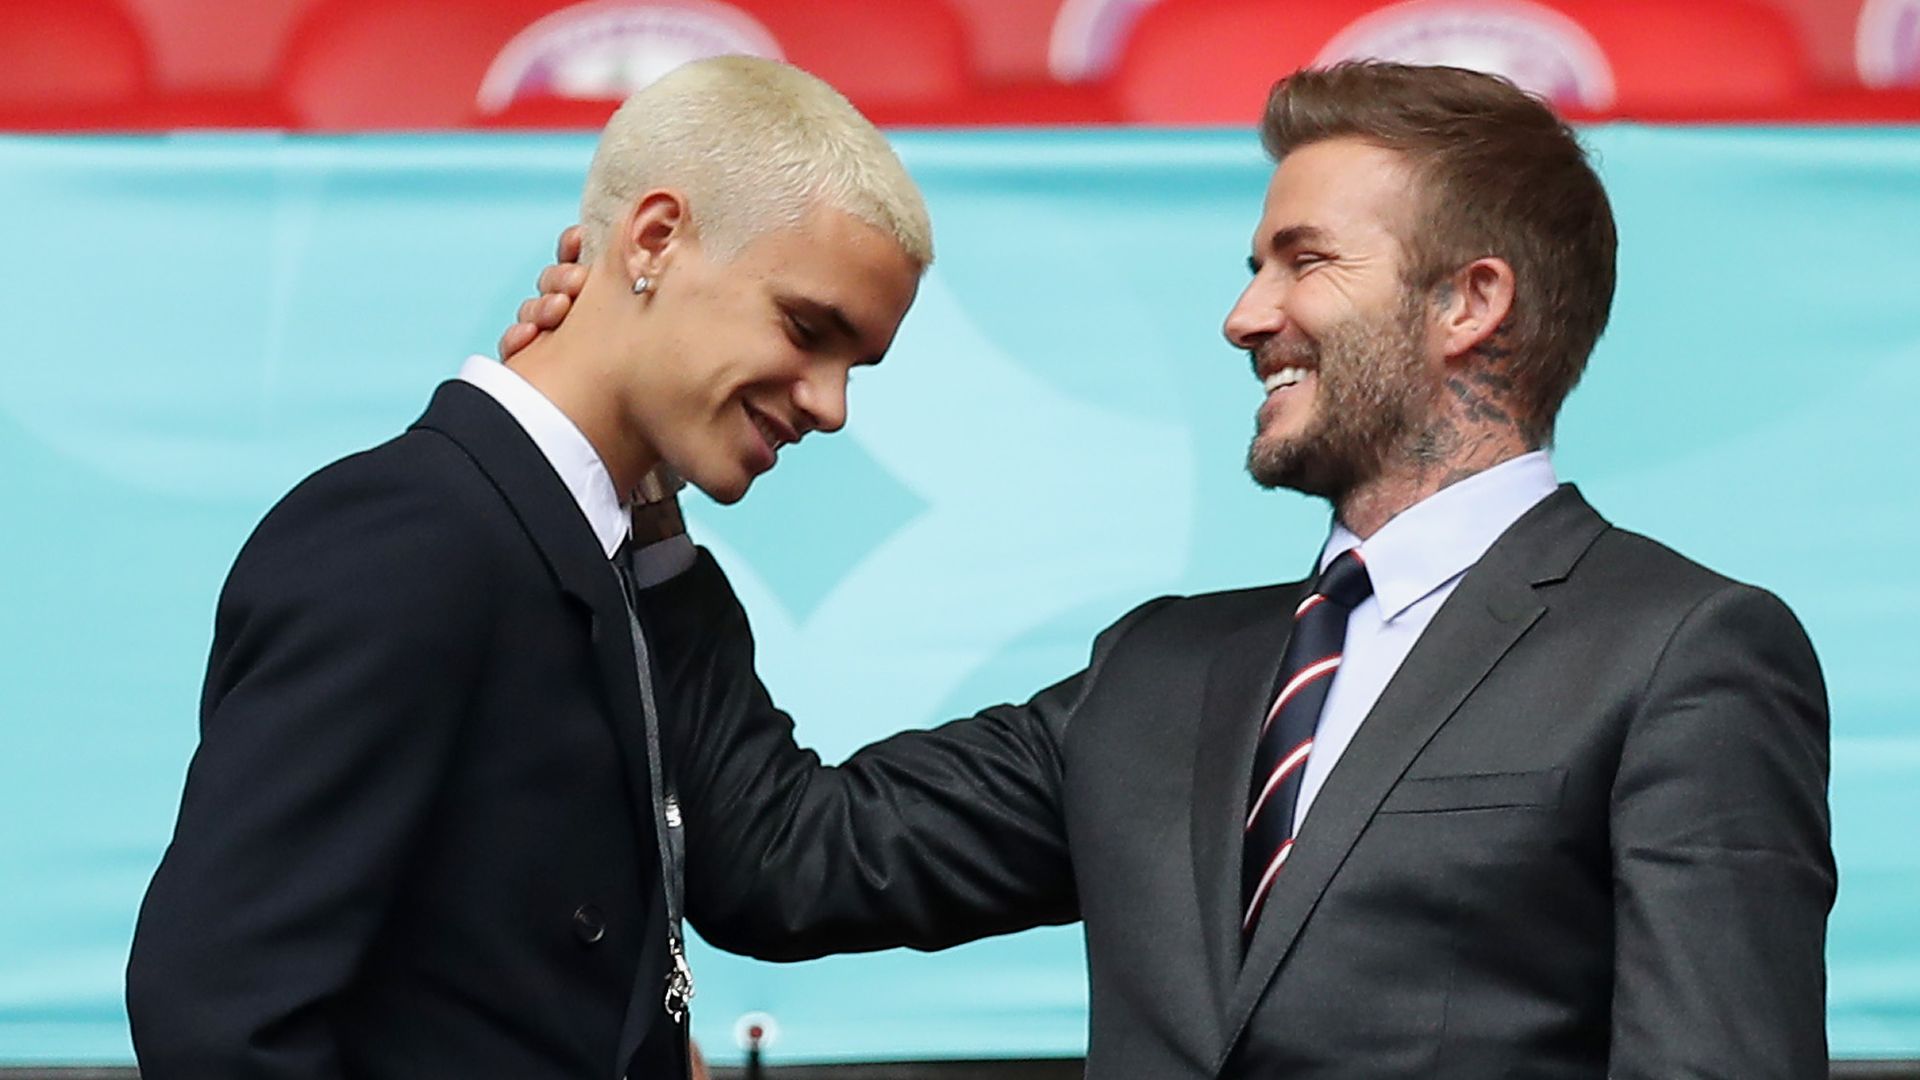 Romeo James Beckham and his father, David Beckham react during the UEFA Euro 2020 Championship Round of 16 match between England and Germany at Wembley Stadium on June 29, 2021 